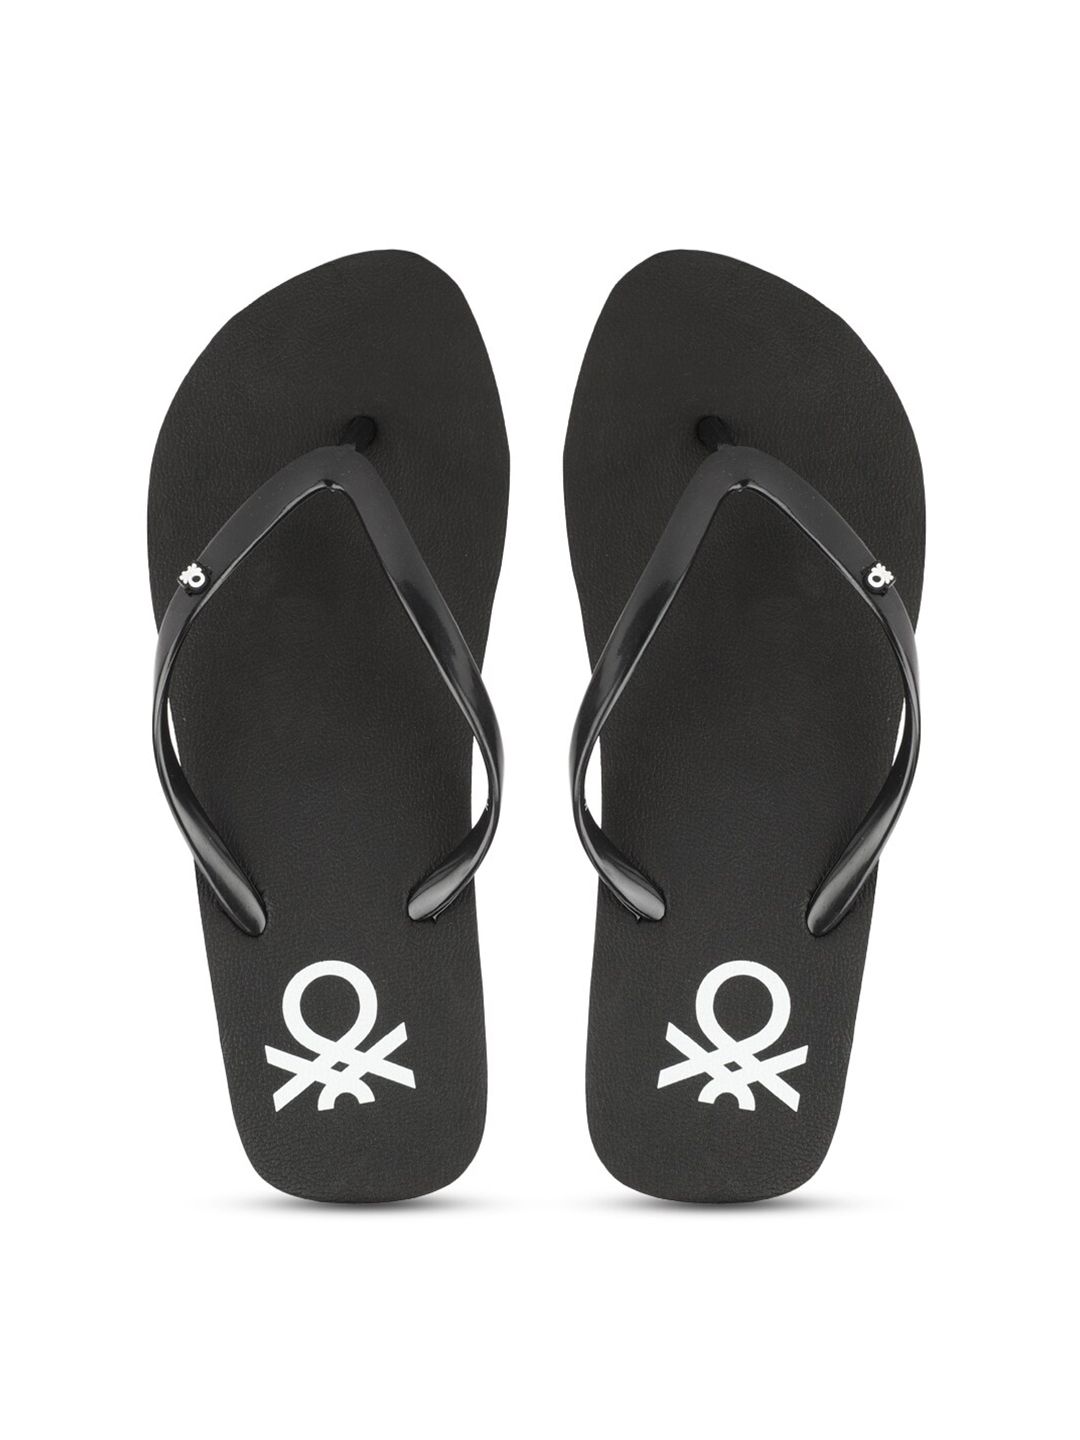 United Colors of Benetton Women Black Printed Rubber Thong Flip-Flops Price in India